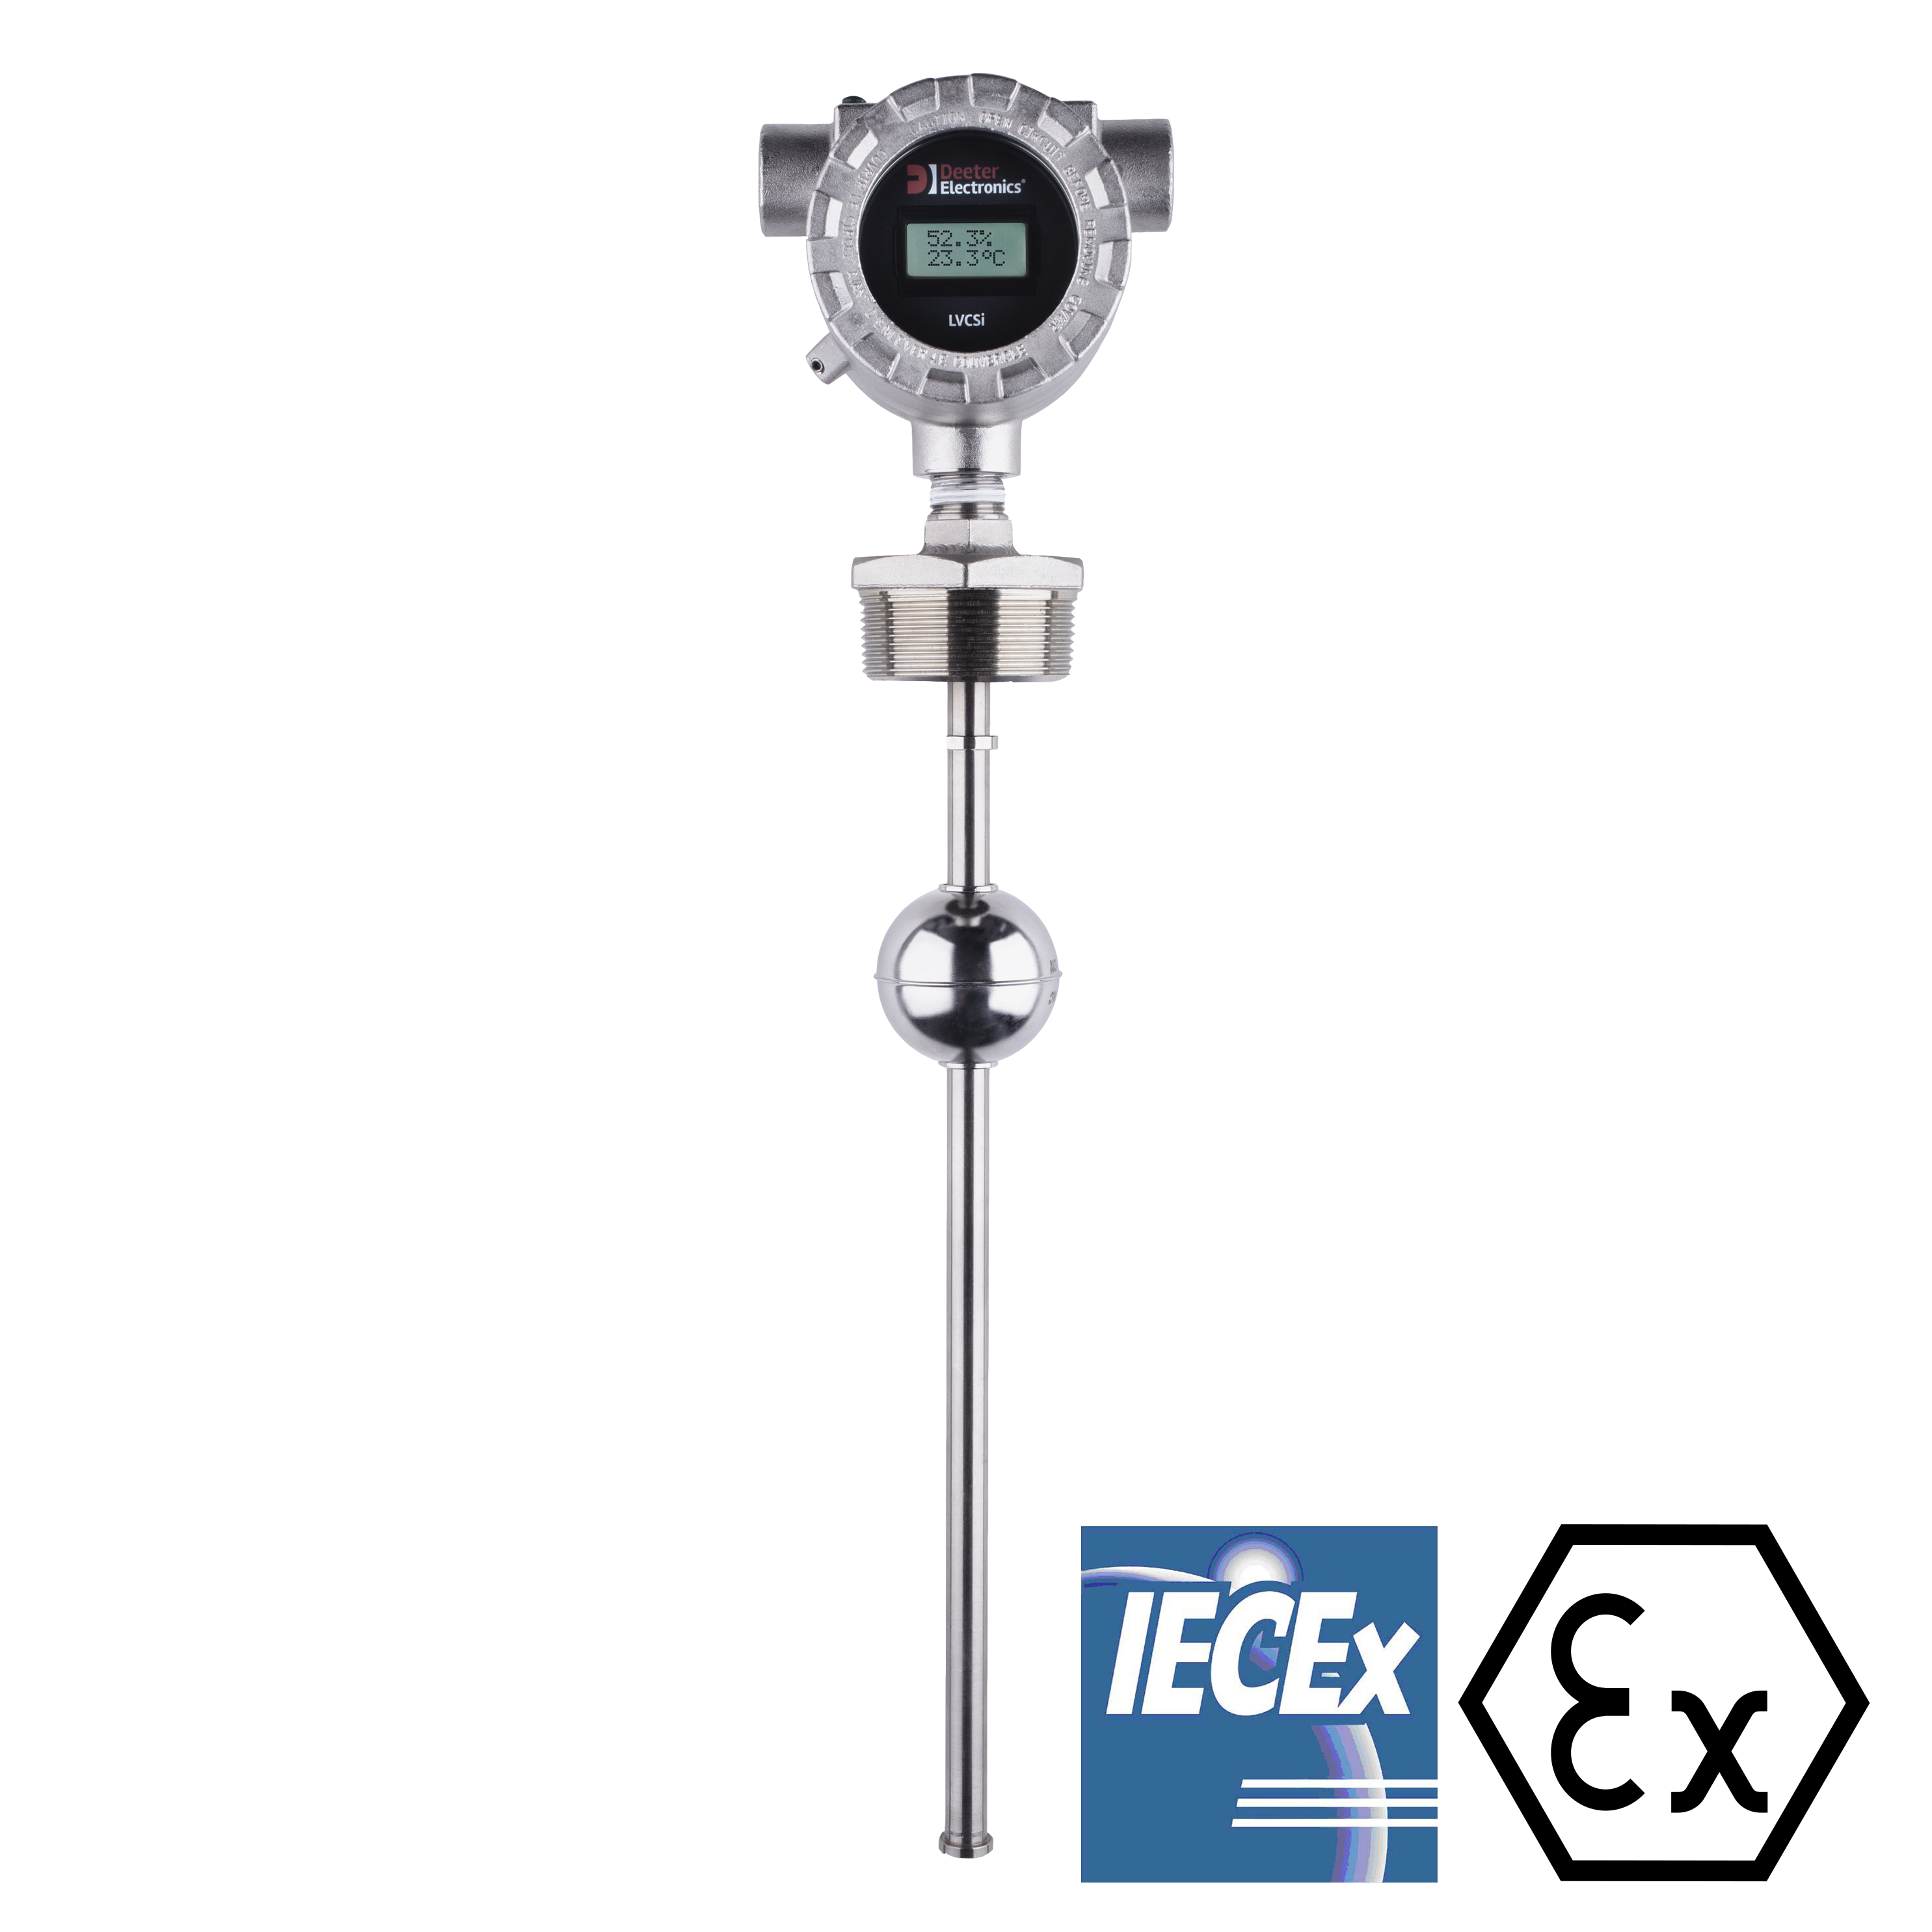 Explosion proof continuous vertical liquid level sensor with integrated display